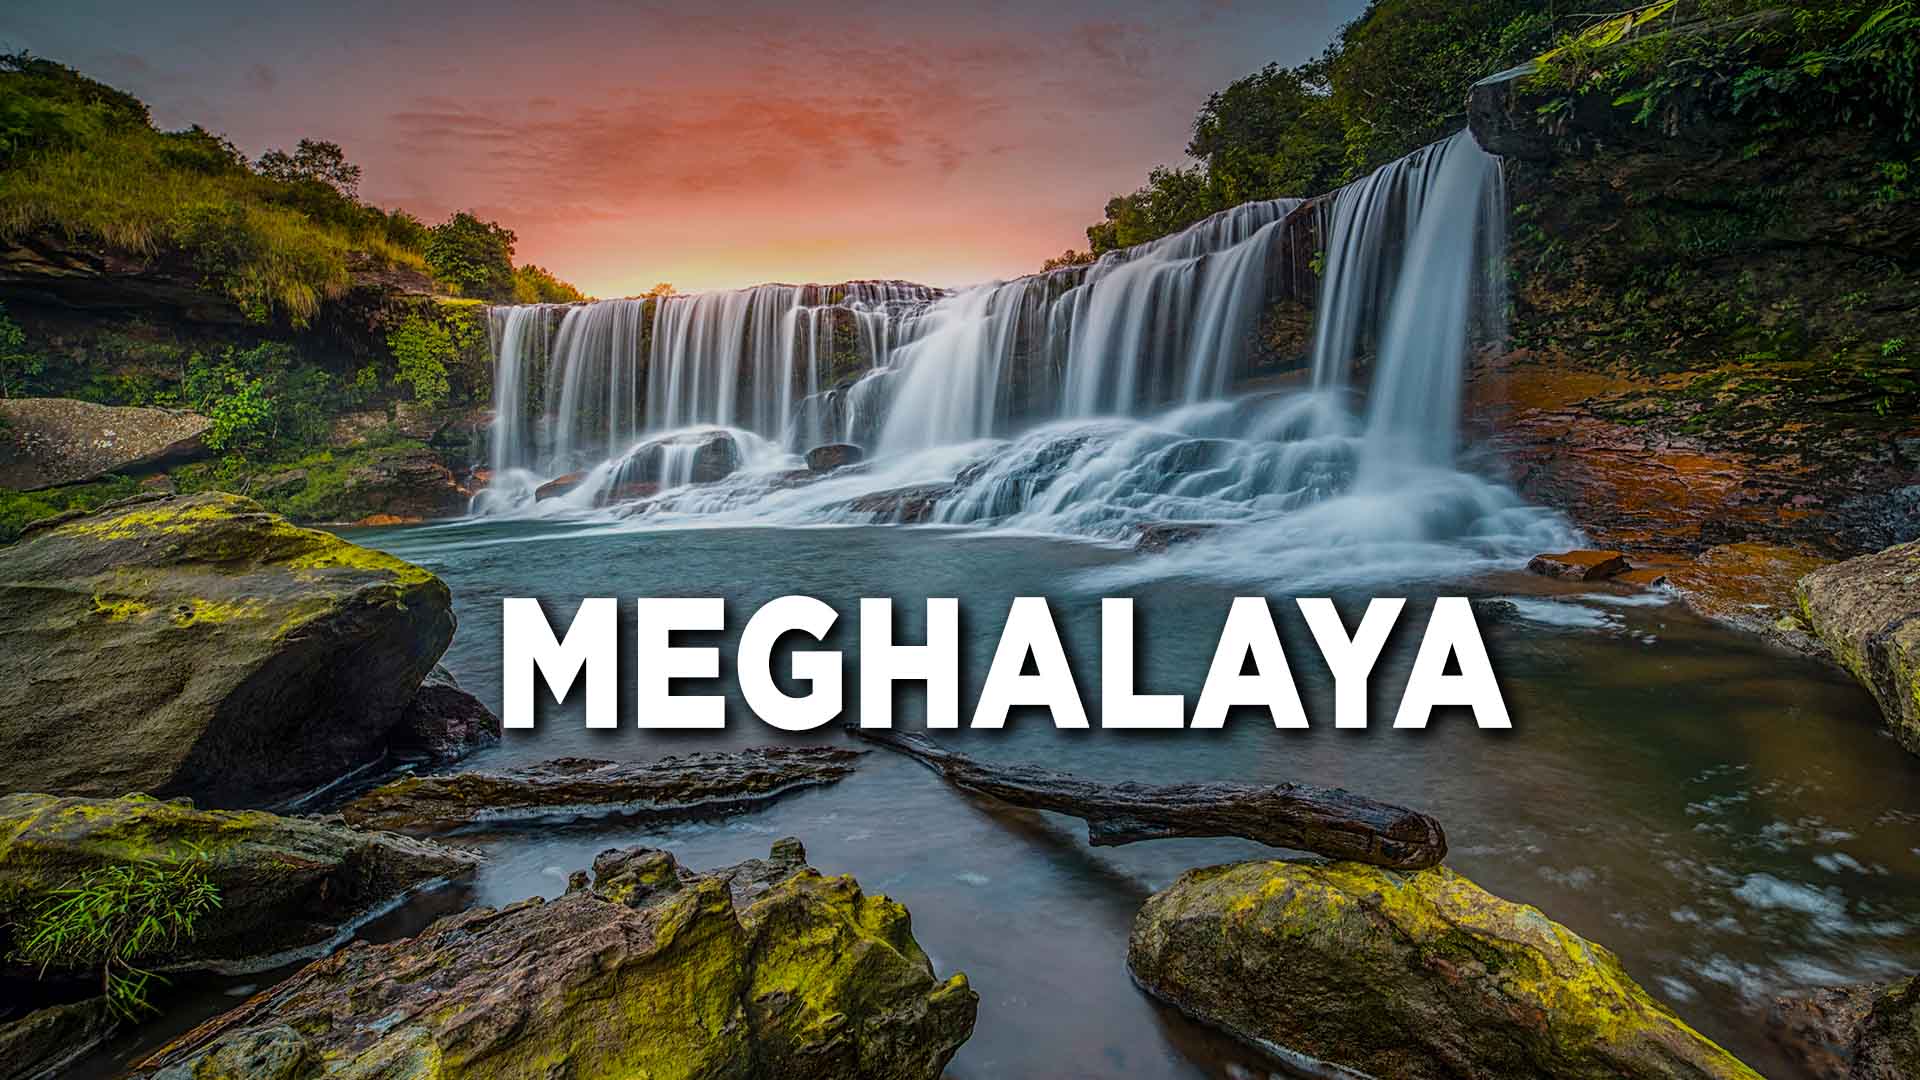 essay on tourism potential of meghalaya